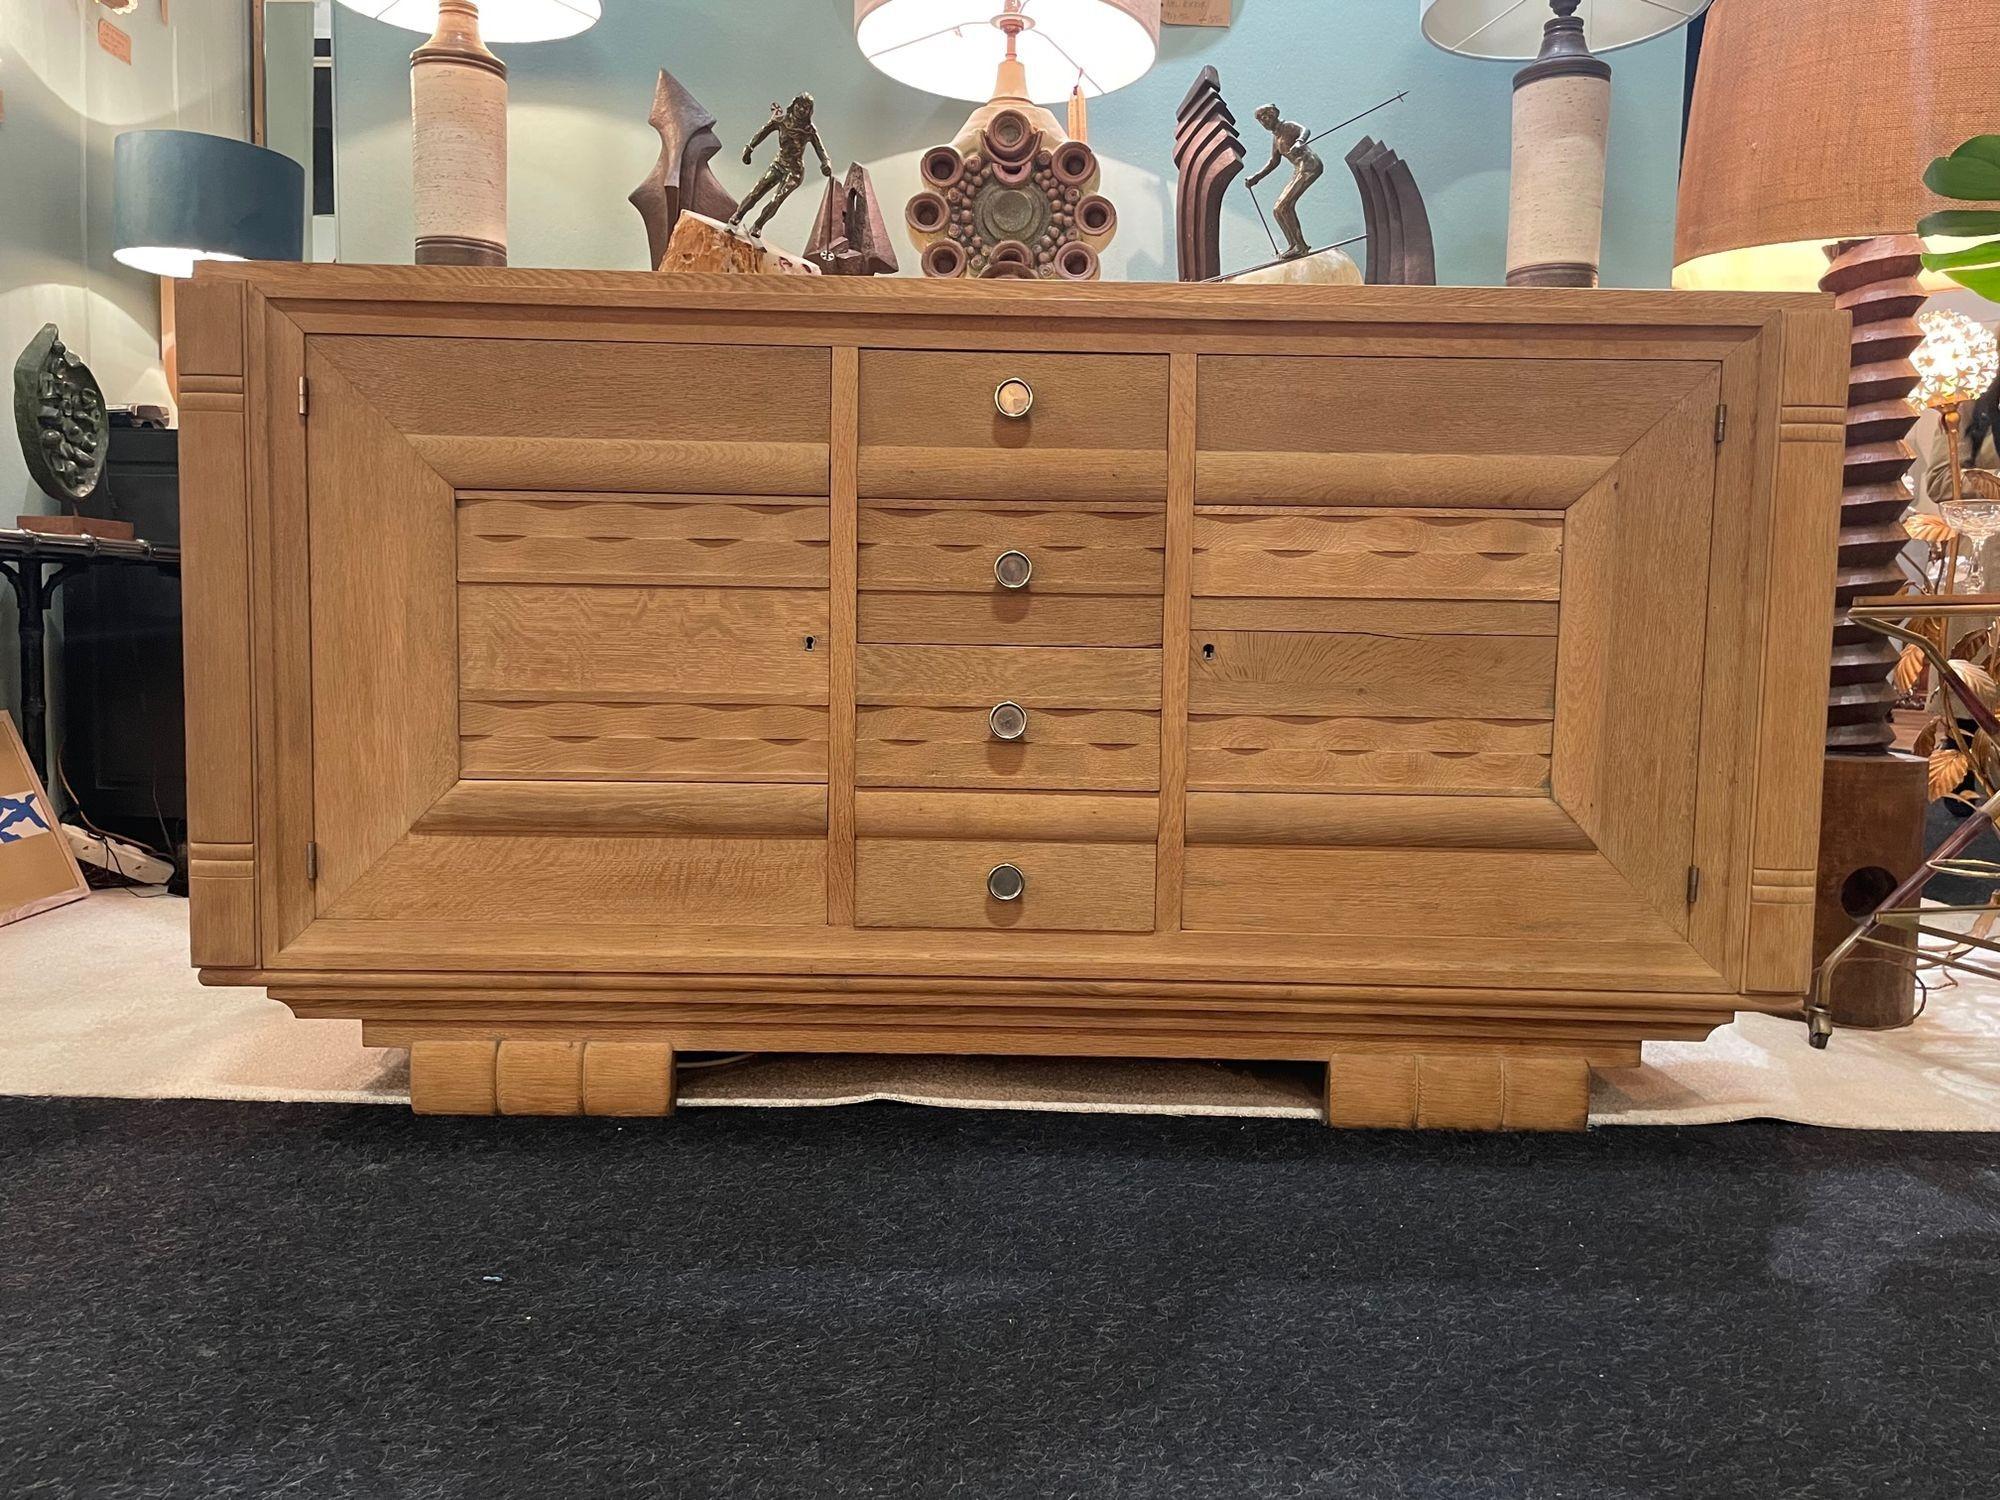 A French 1940s bleached oak sideboard with two doors and four central drawers each with orignal circular knobs. The front doors and drawers have a decorative detailed wavy relief design and there are two original brass keys.